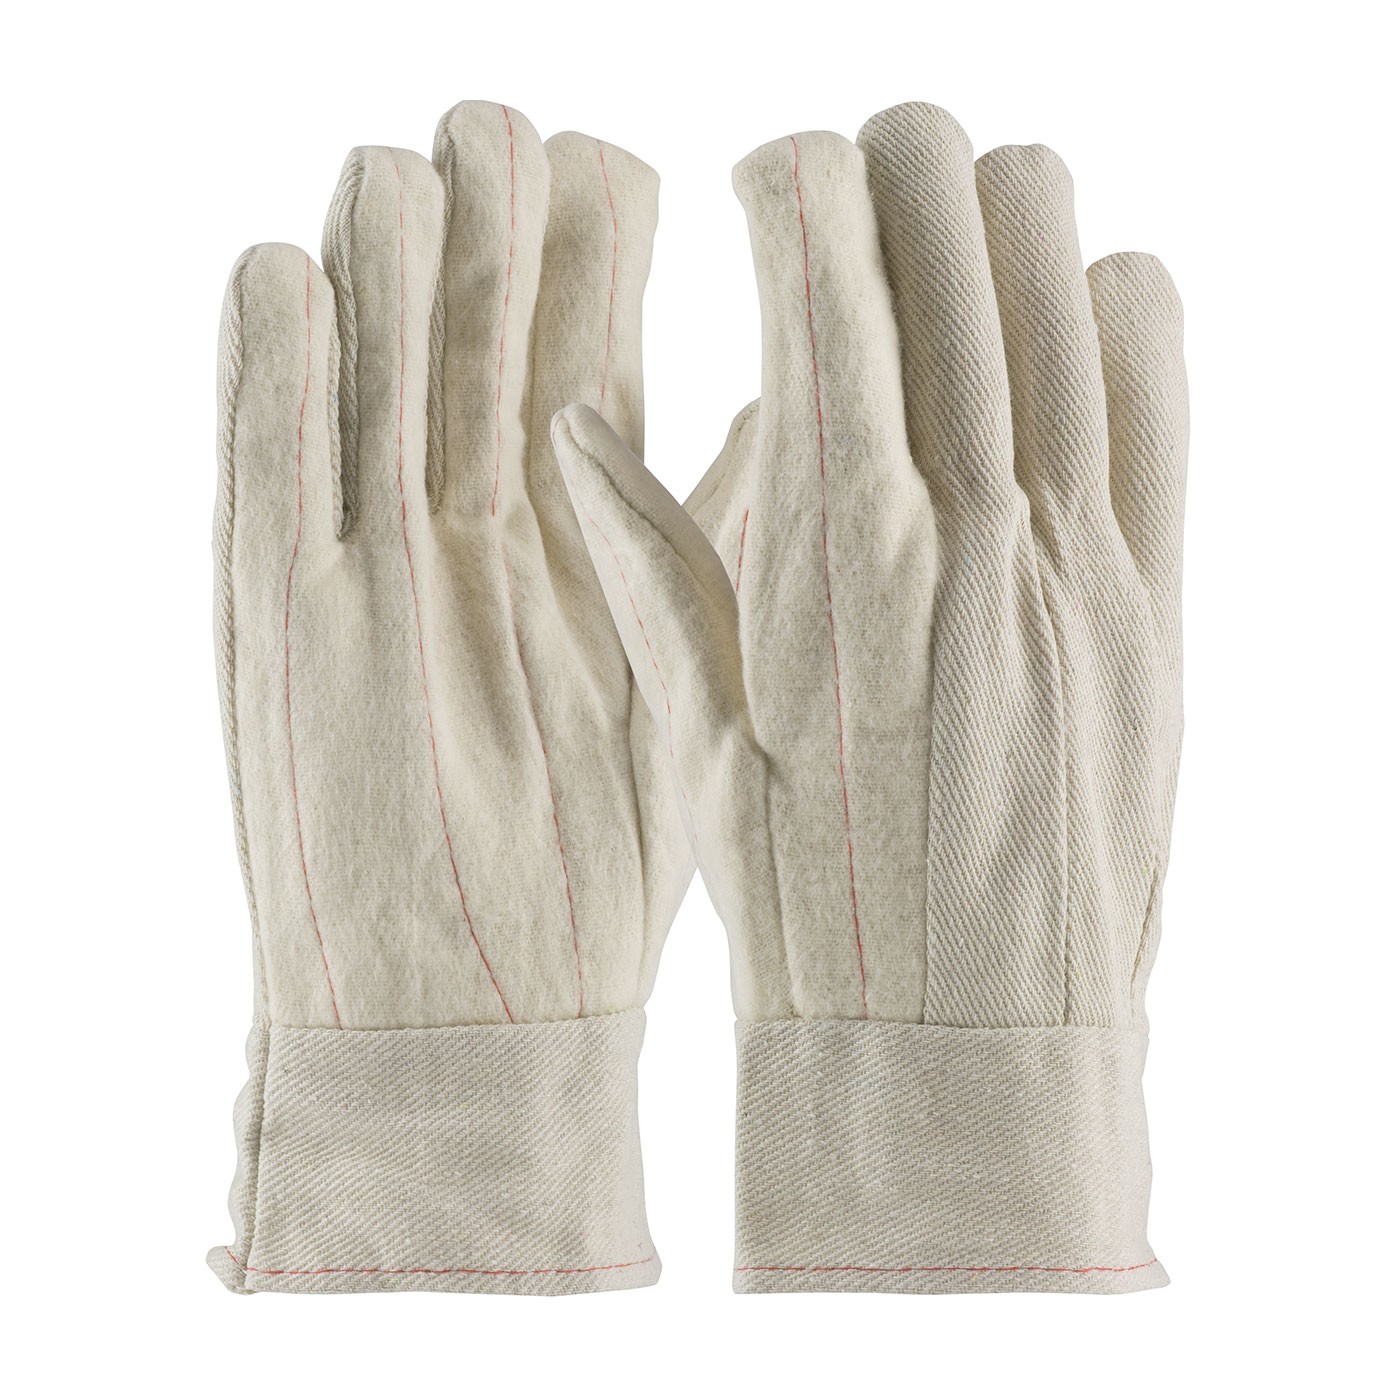 PIP® Cotton Canvas Double Palm Glove with Nap-out Finish - Band Top  (#92-918BTO)